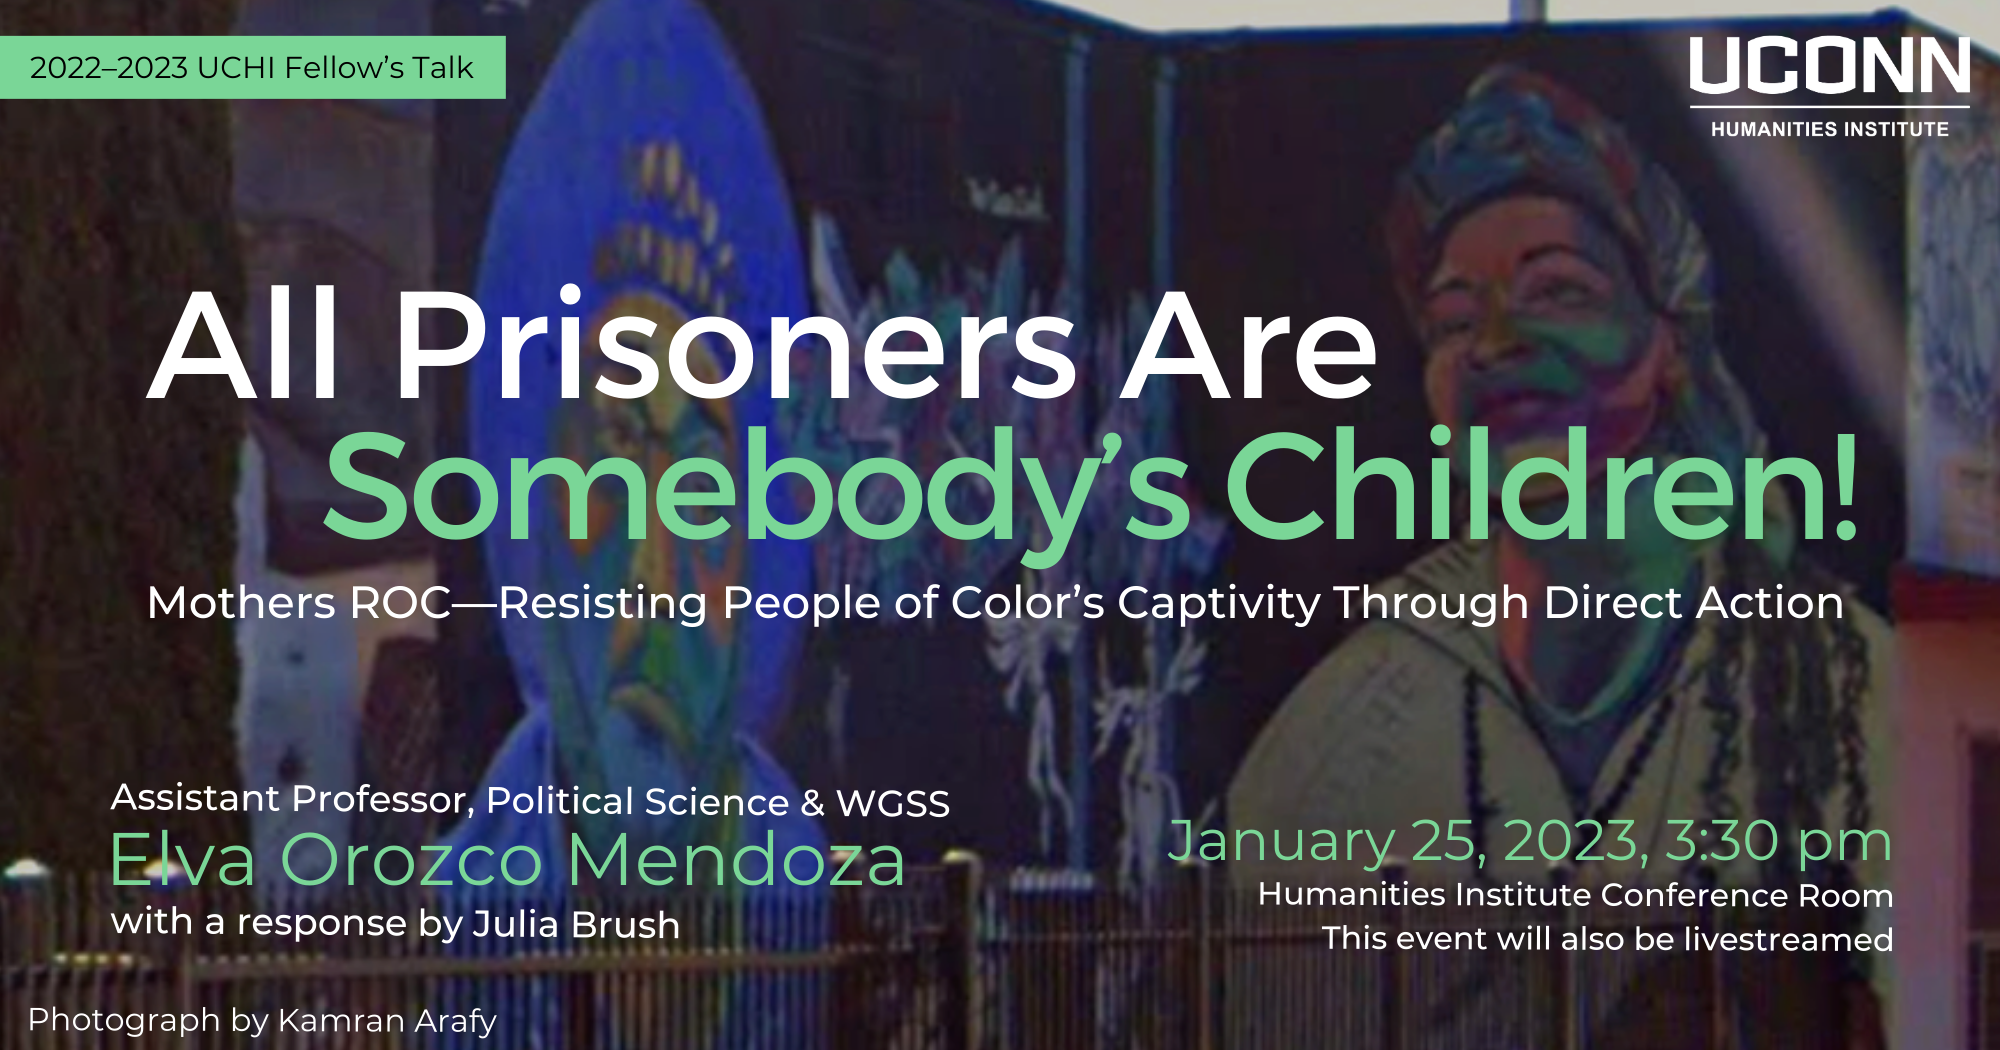 2022–23 UCHI Fellow's Talk. All Prisoners are Somebody's Children: Mothers ROC—Resisisting People of Color's Captivity Through Direct Action. Assistant Professor Political Science & WGSS, Elva Orozco Mendoza, with a response by Julia Brush. January 25, 2023, 3:30pm. Humanities Institute Conference Room. This event will also be livestreamed.